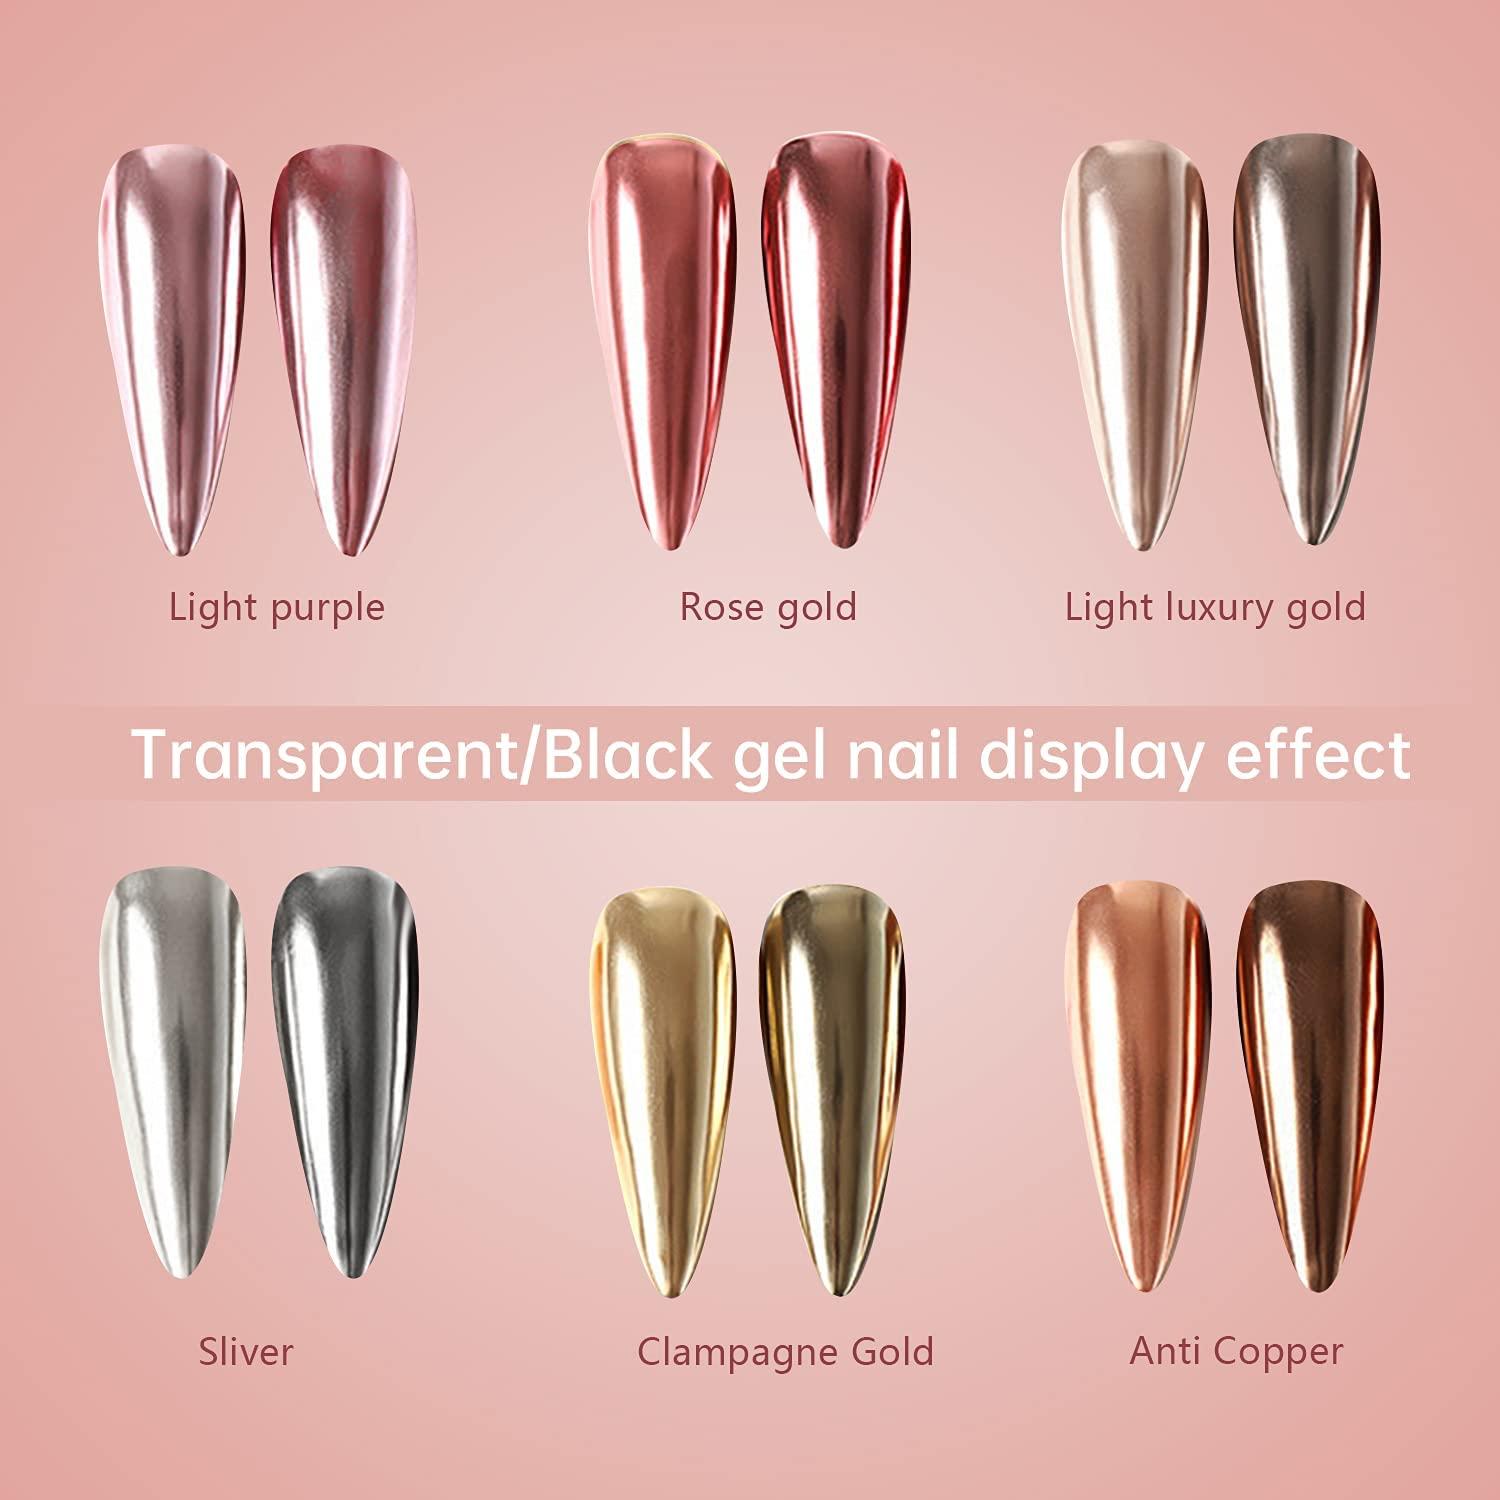 BISHENGYF Chrome Nail Powder 6 Jars Rose Gold Mirror Effect Manicure  Pigment Glitter Dust for Salon Home DIY Nail Art Deco with 6 Eyeshadow  Applicators